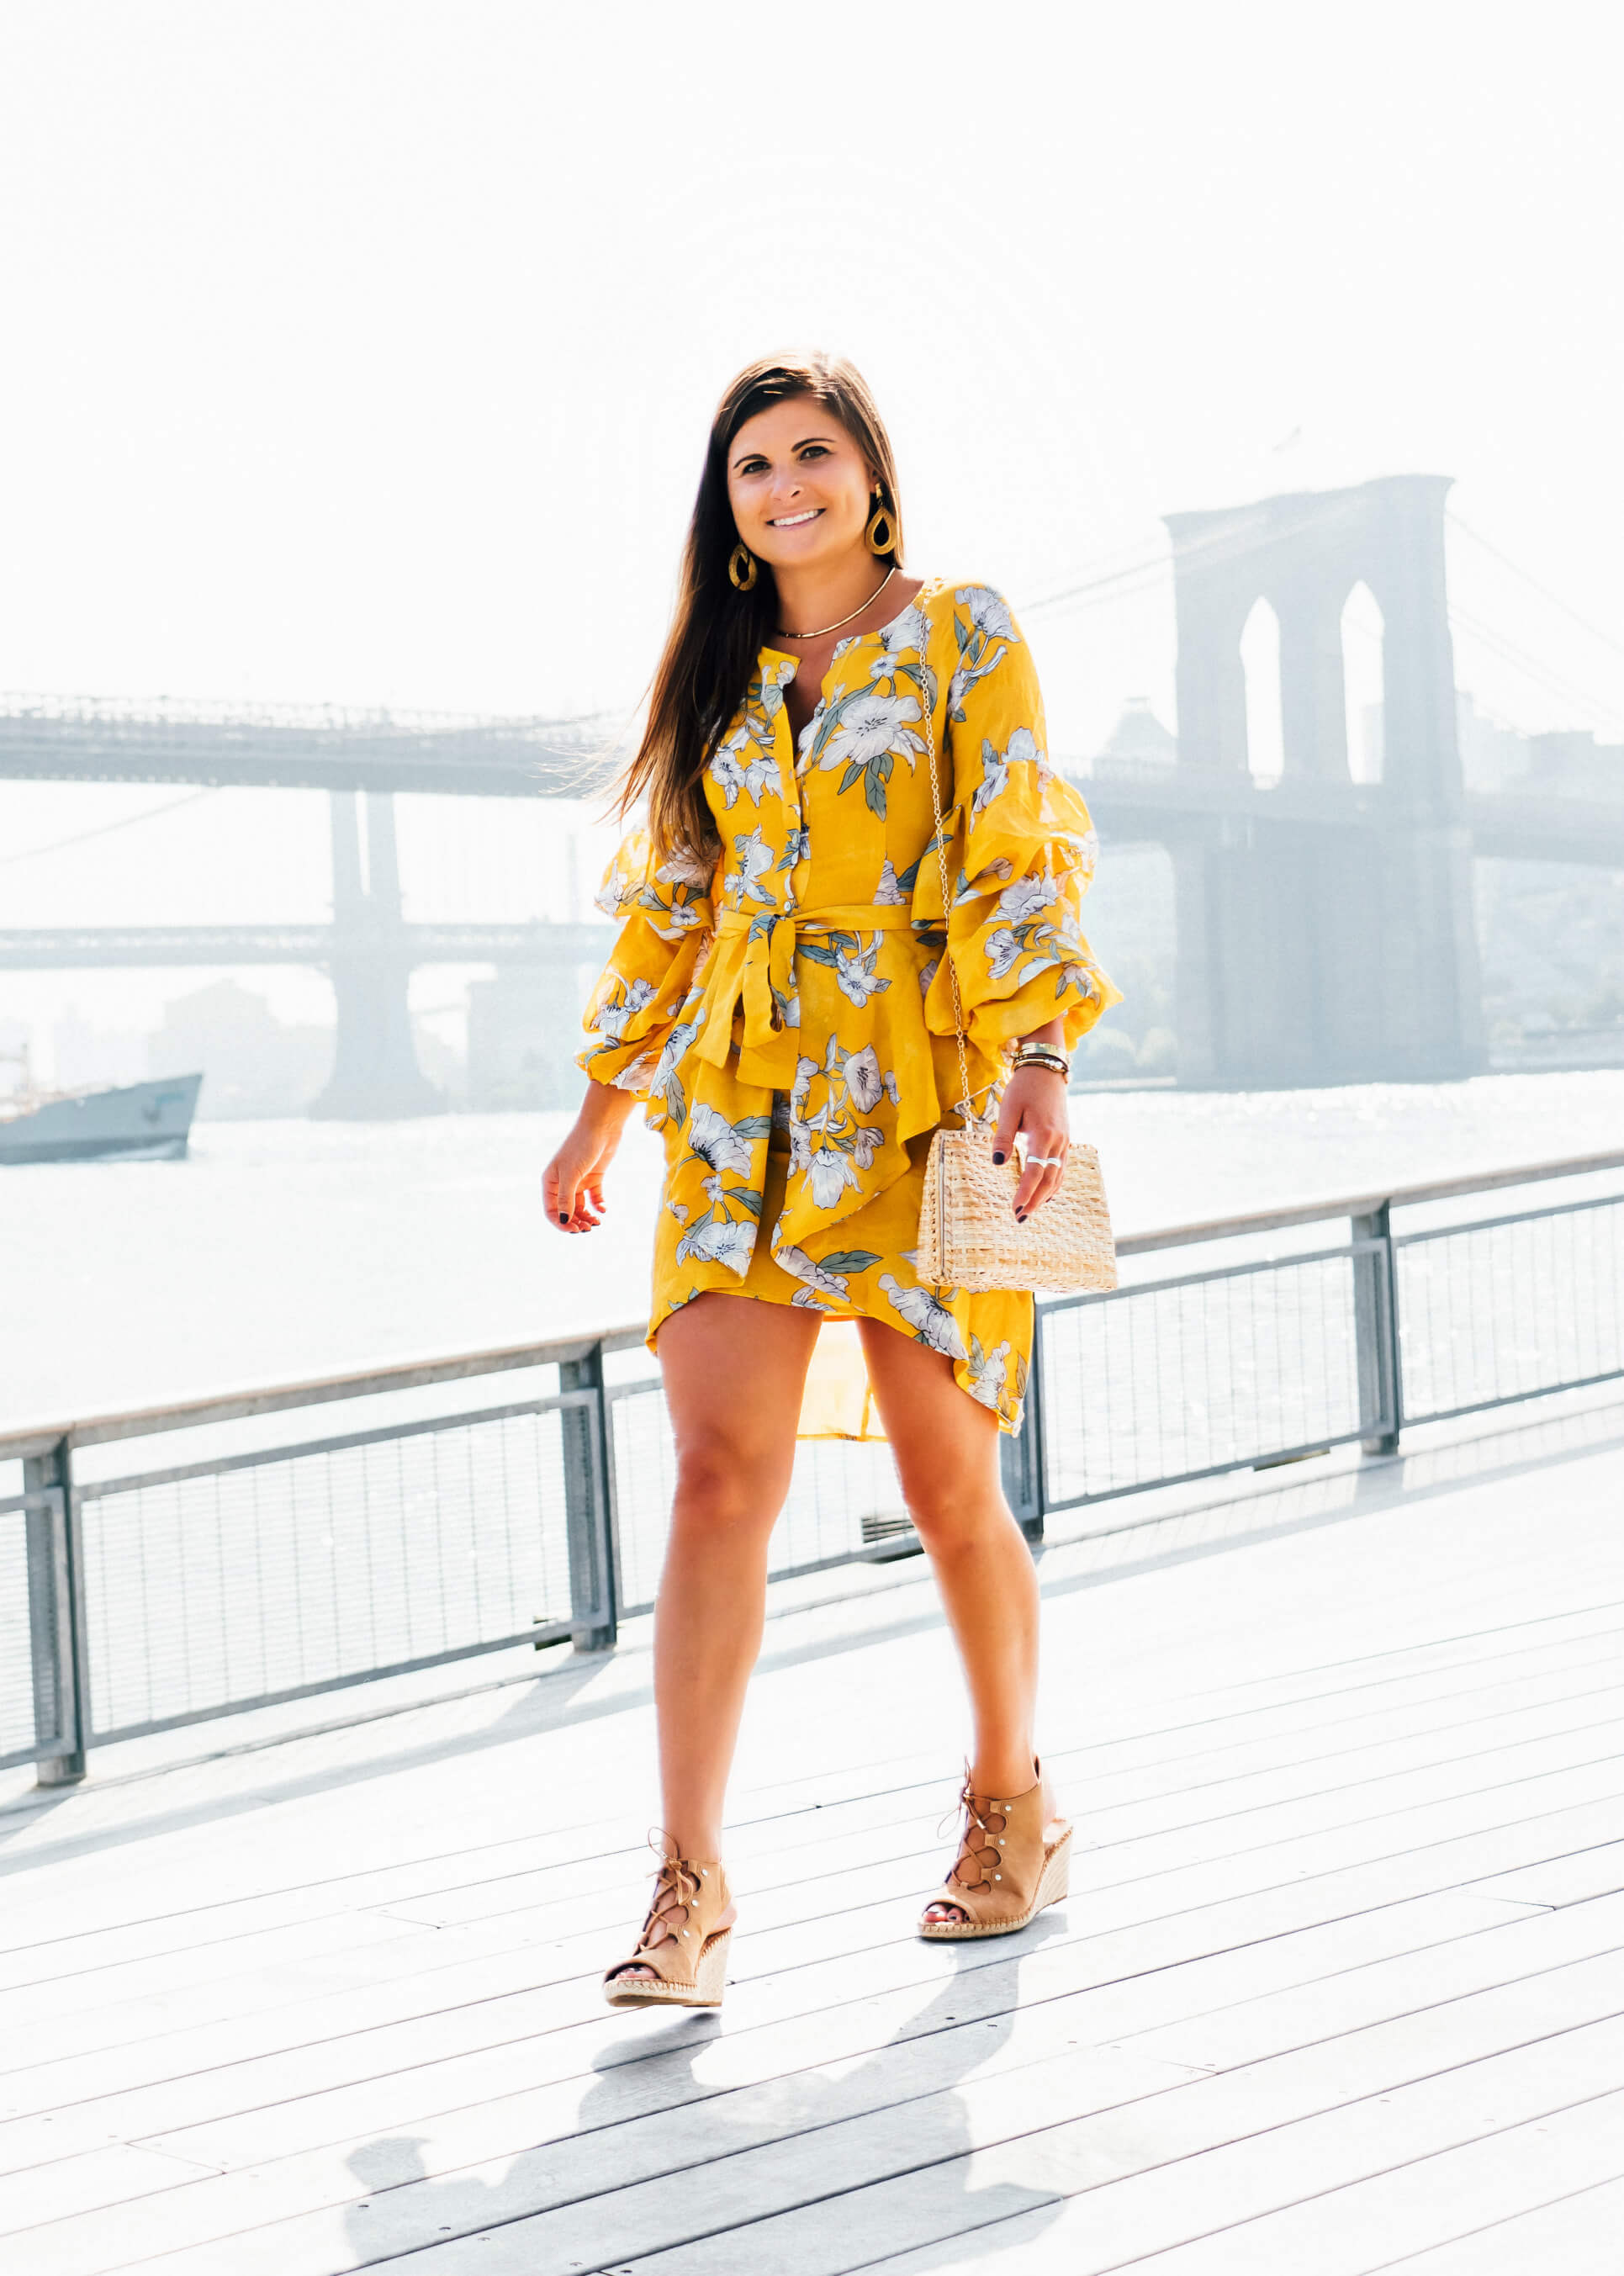 Christelle x J.O.A. Yellow Floral Dress, Summer & Fall Date Outfit, Brooklyn Bridge Photo Shoot, Tilden of To Be Bright